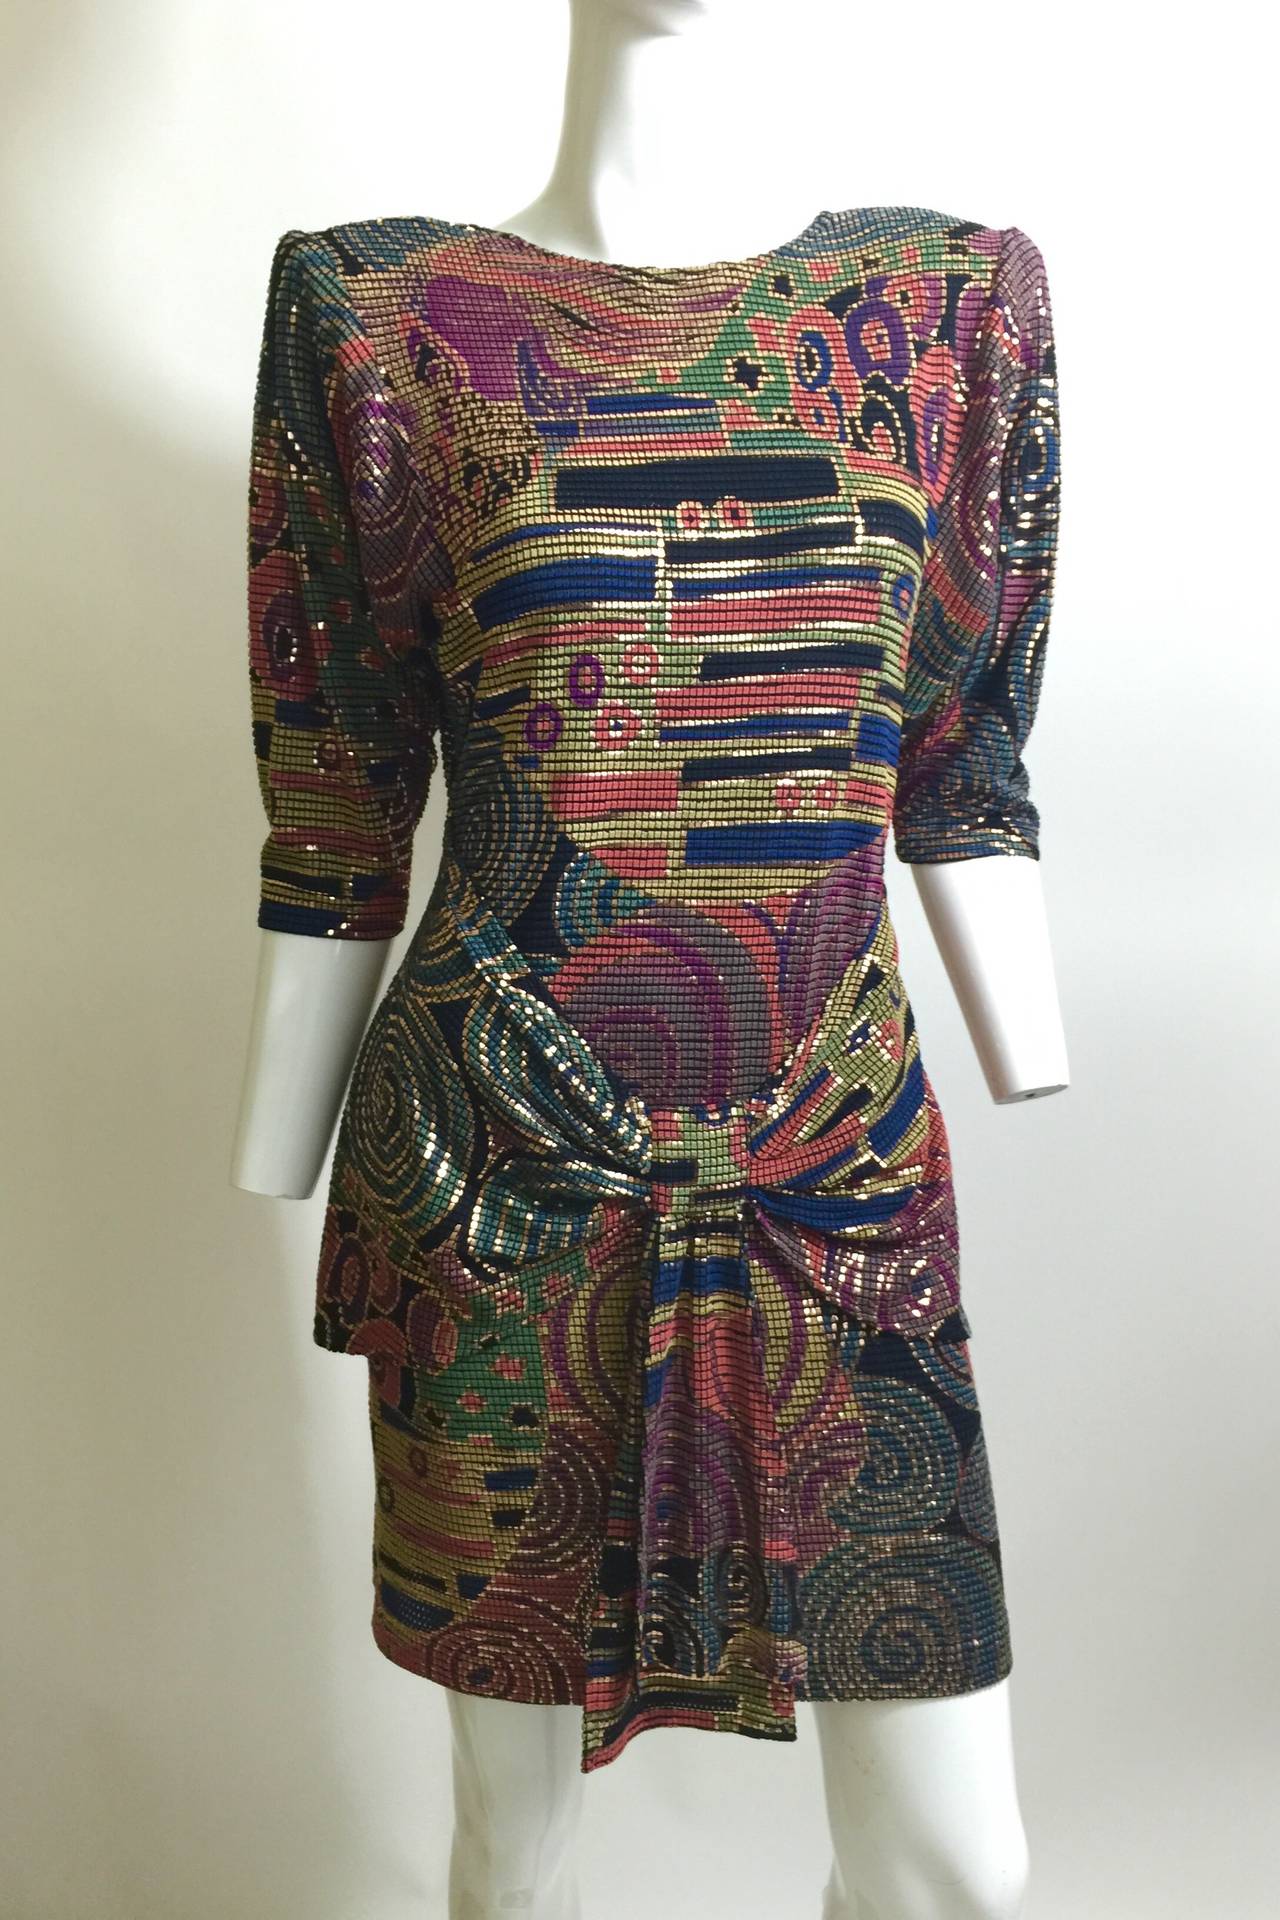 1980s Janine hand painted mosaic mesh dress in shades of purple, mauve, turquoise and green with gold swirls throughout. 
The front of the dress has a round neckline, the shoulders have pads inside (and can easily be removed if you prefer no pads),